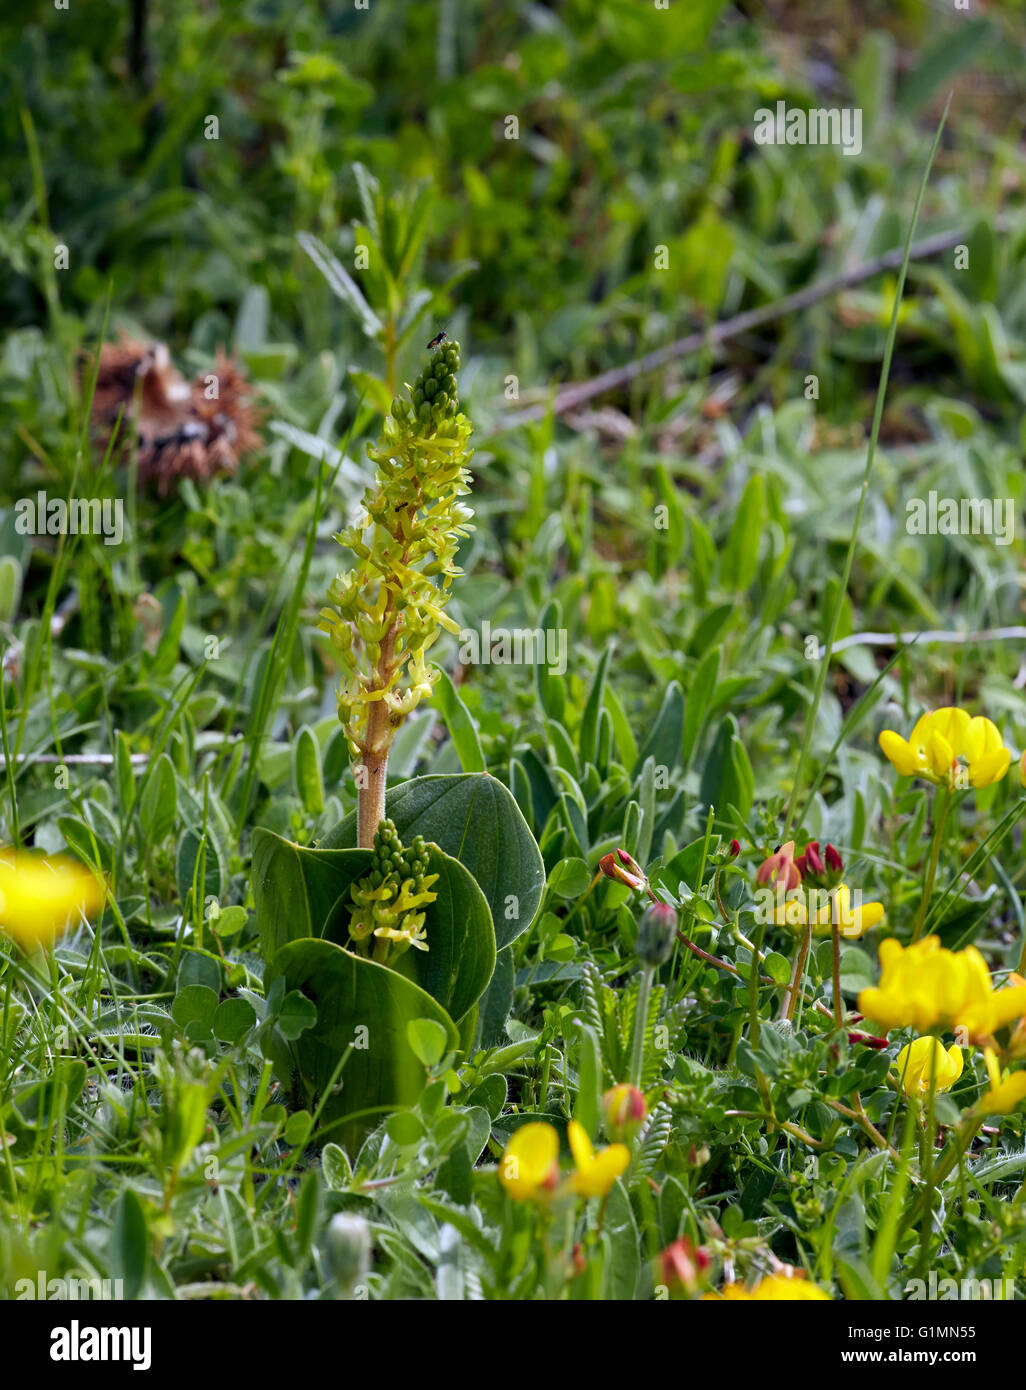 Common Twayblade. Howell Hill nature reserve, Ewell, Surrey, England. Stock Photo